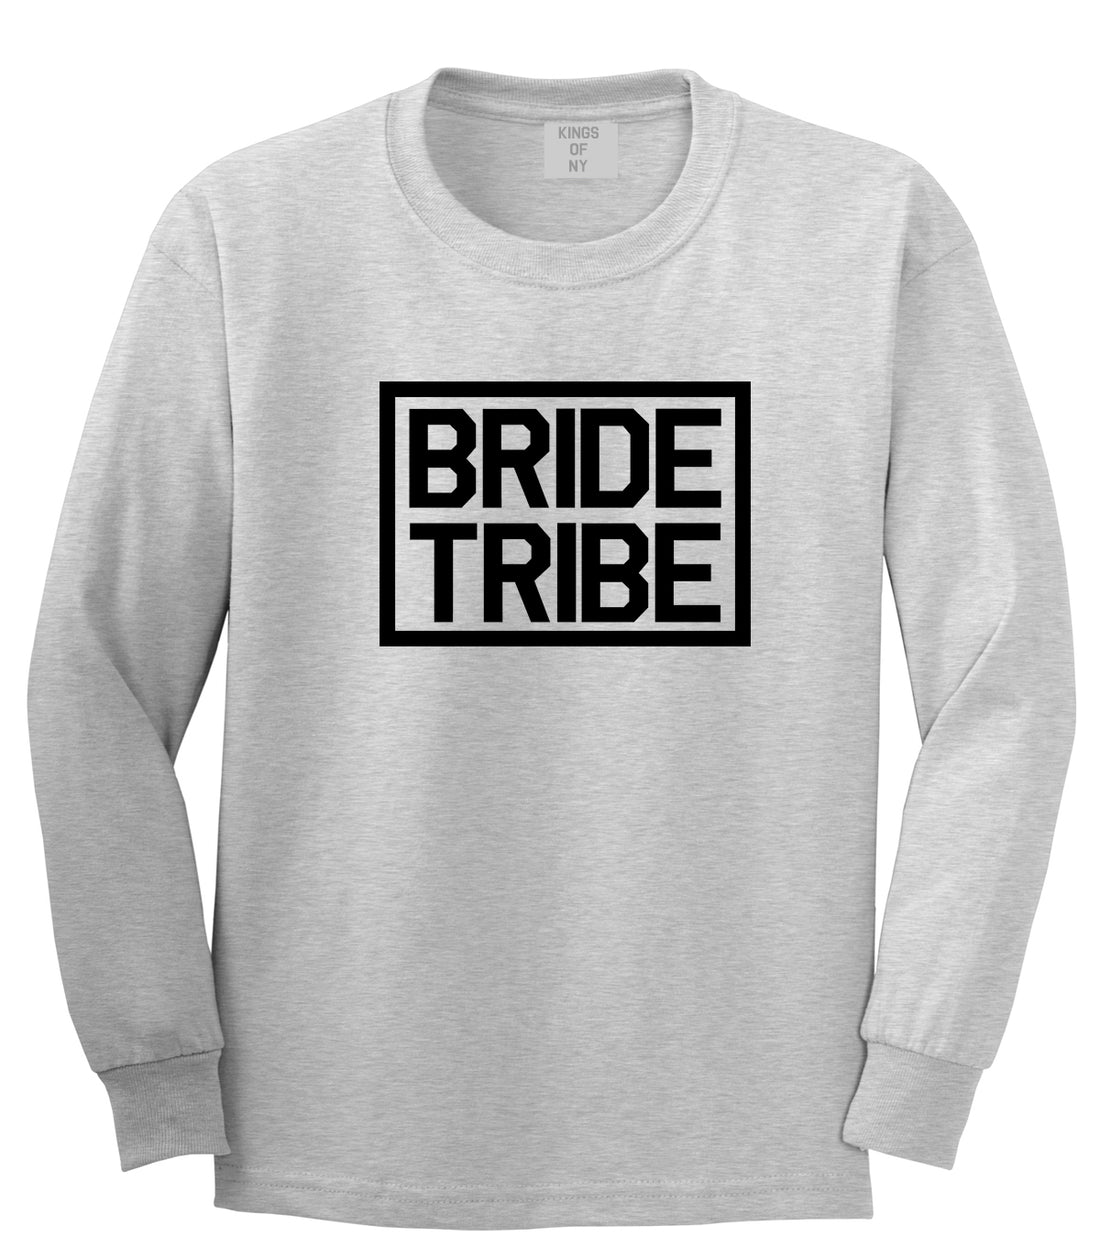 Bride Tribe Bachlorette Party Grey Long Sleeve T-Shirt by Kings Of NY